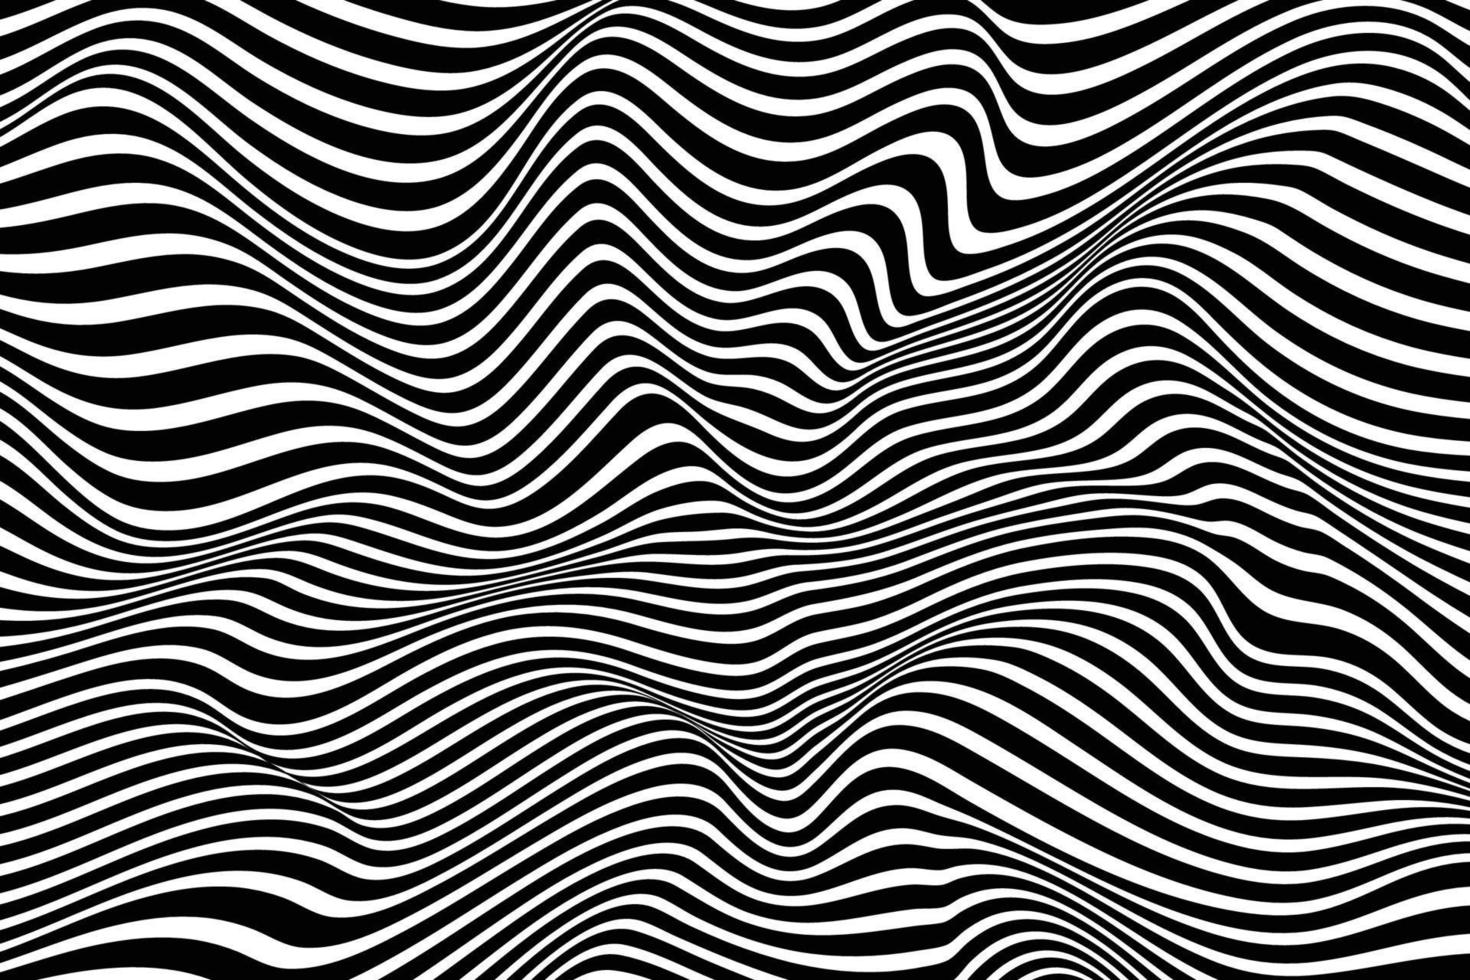 Curved wave lines background. Trendy twisted stripes texture illustration. Abstract black and white wave pattern vector